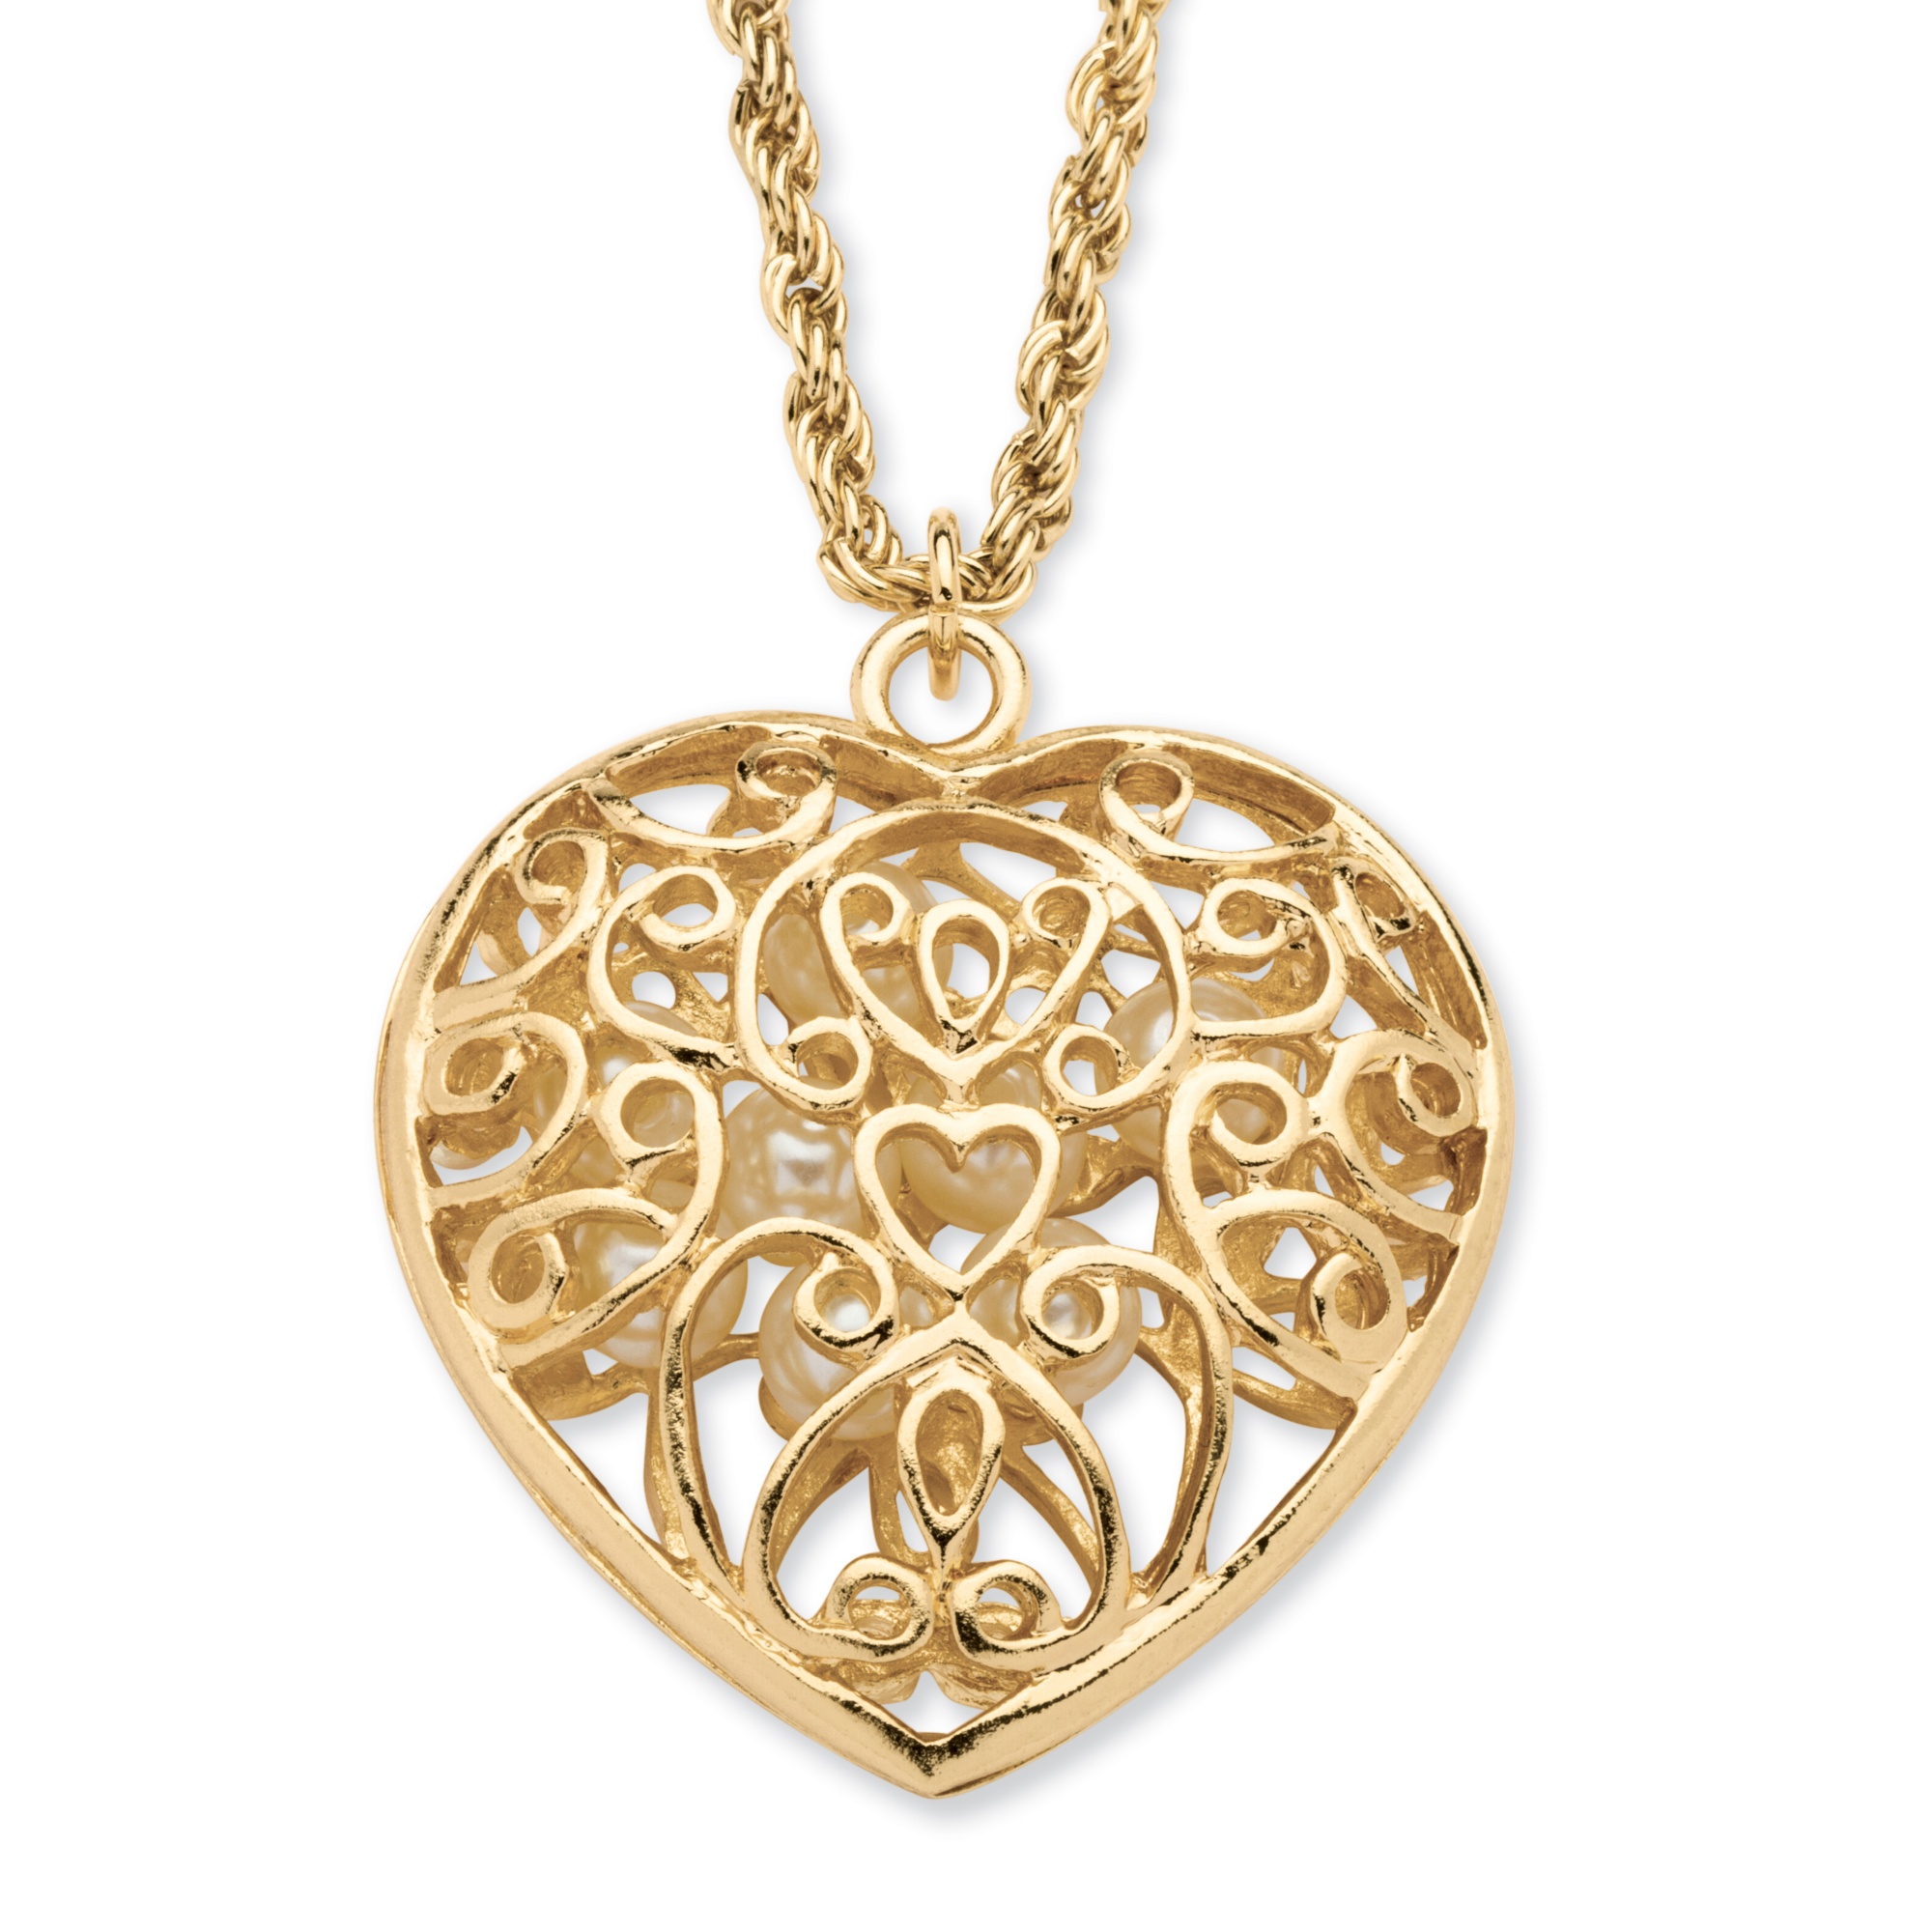 Simulated Pearl Filigree Heart Pendant Necklace in Yellow Gold Tone at ...